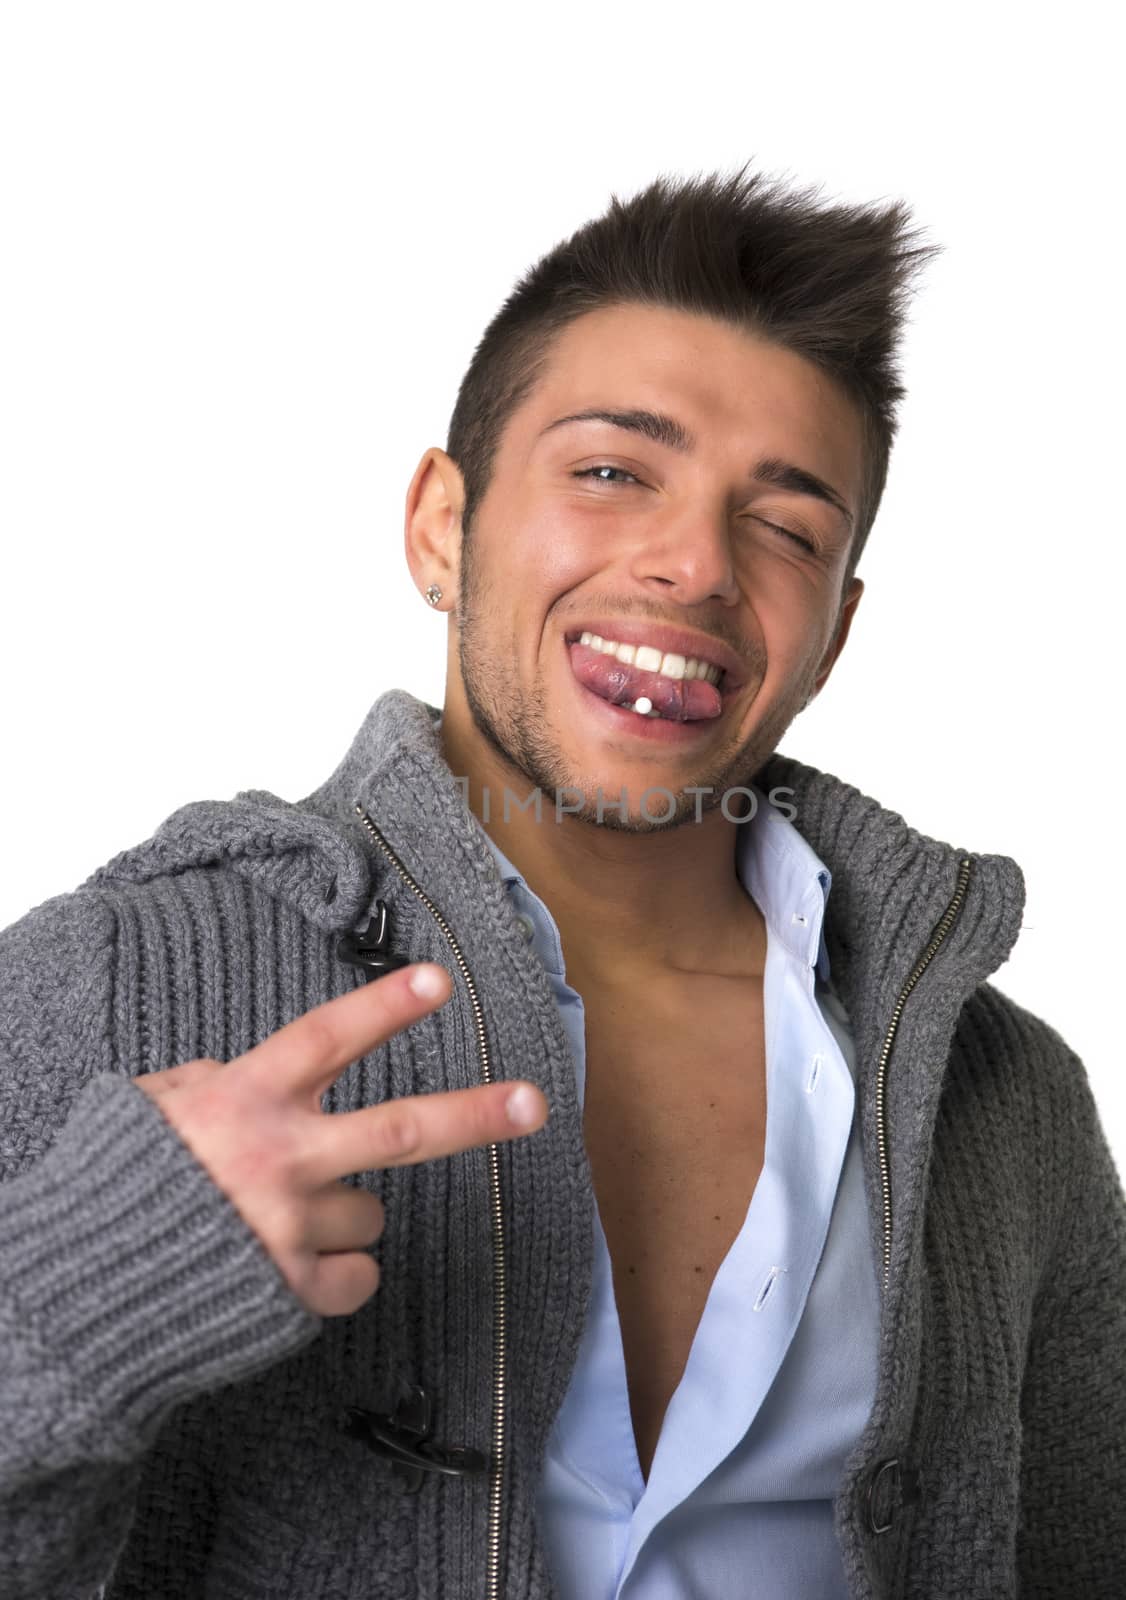 Attractive young man with tongue piercing, doing victory sign by artofphoto